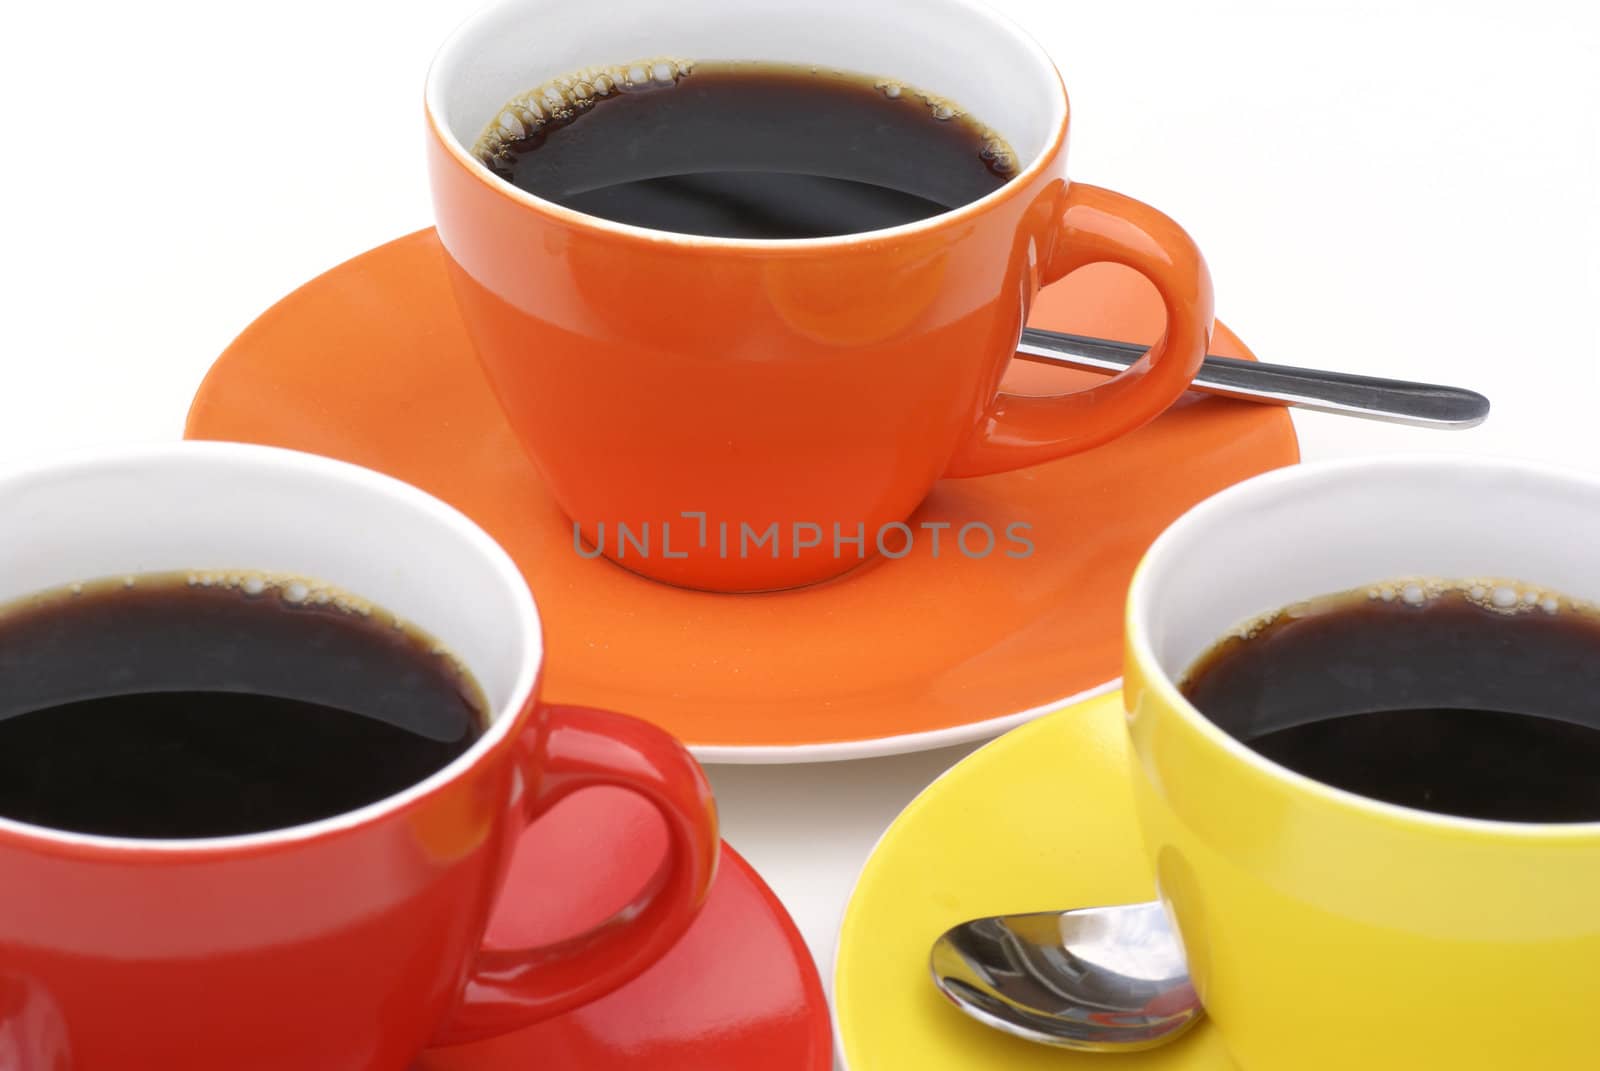 Cups of coffee in multiple spring colors.